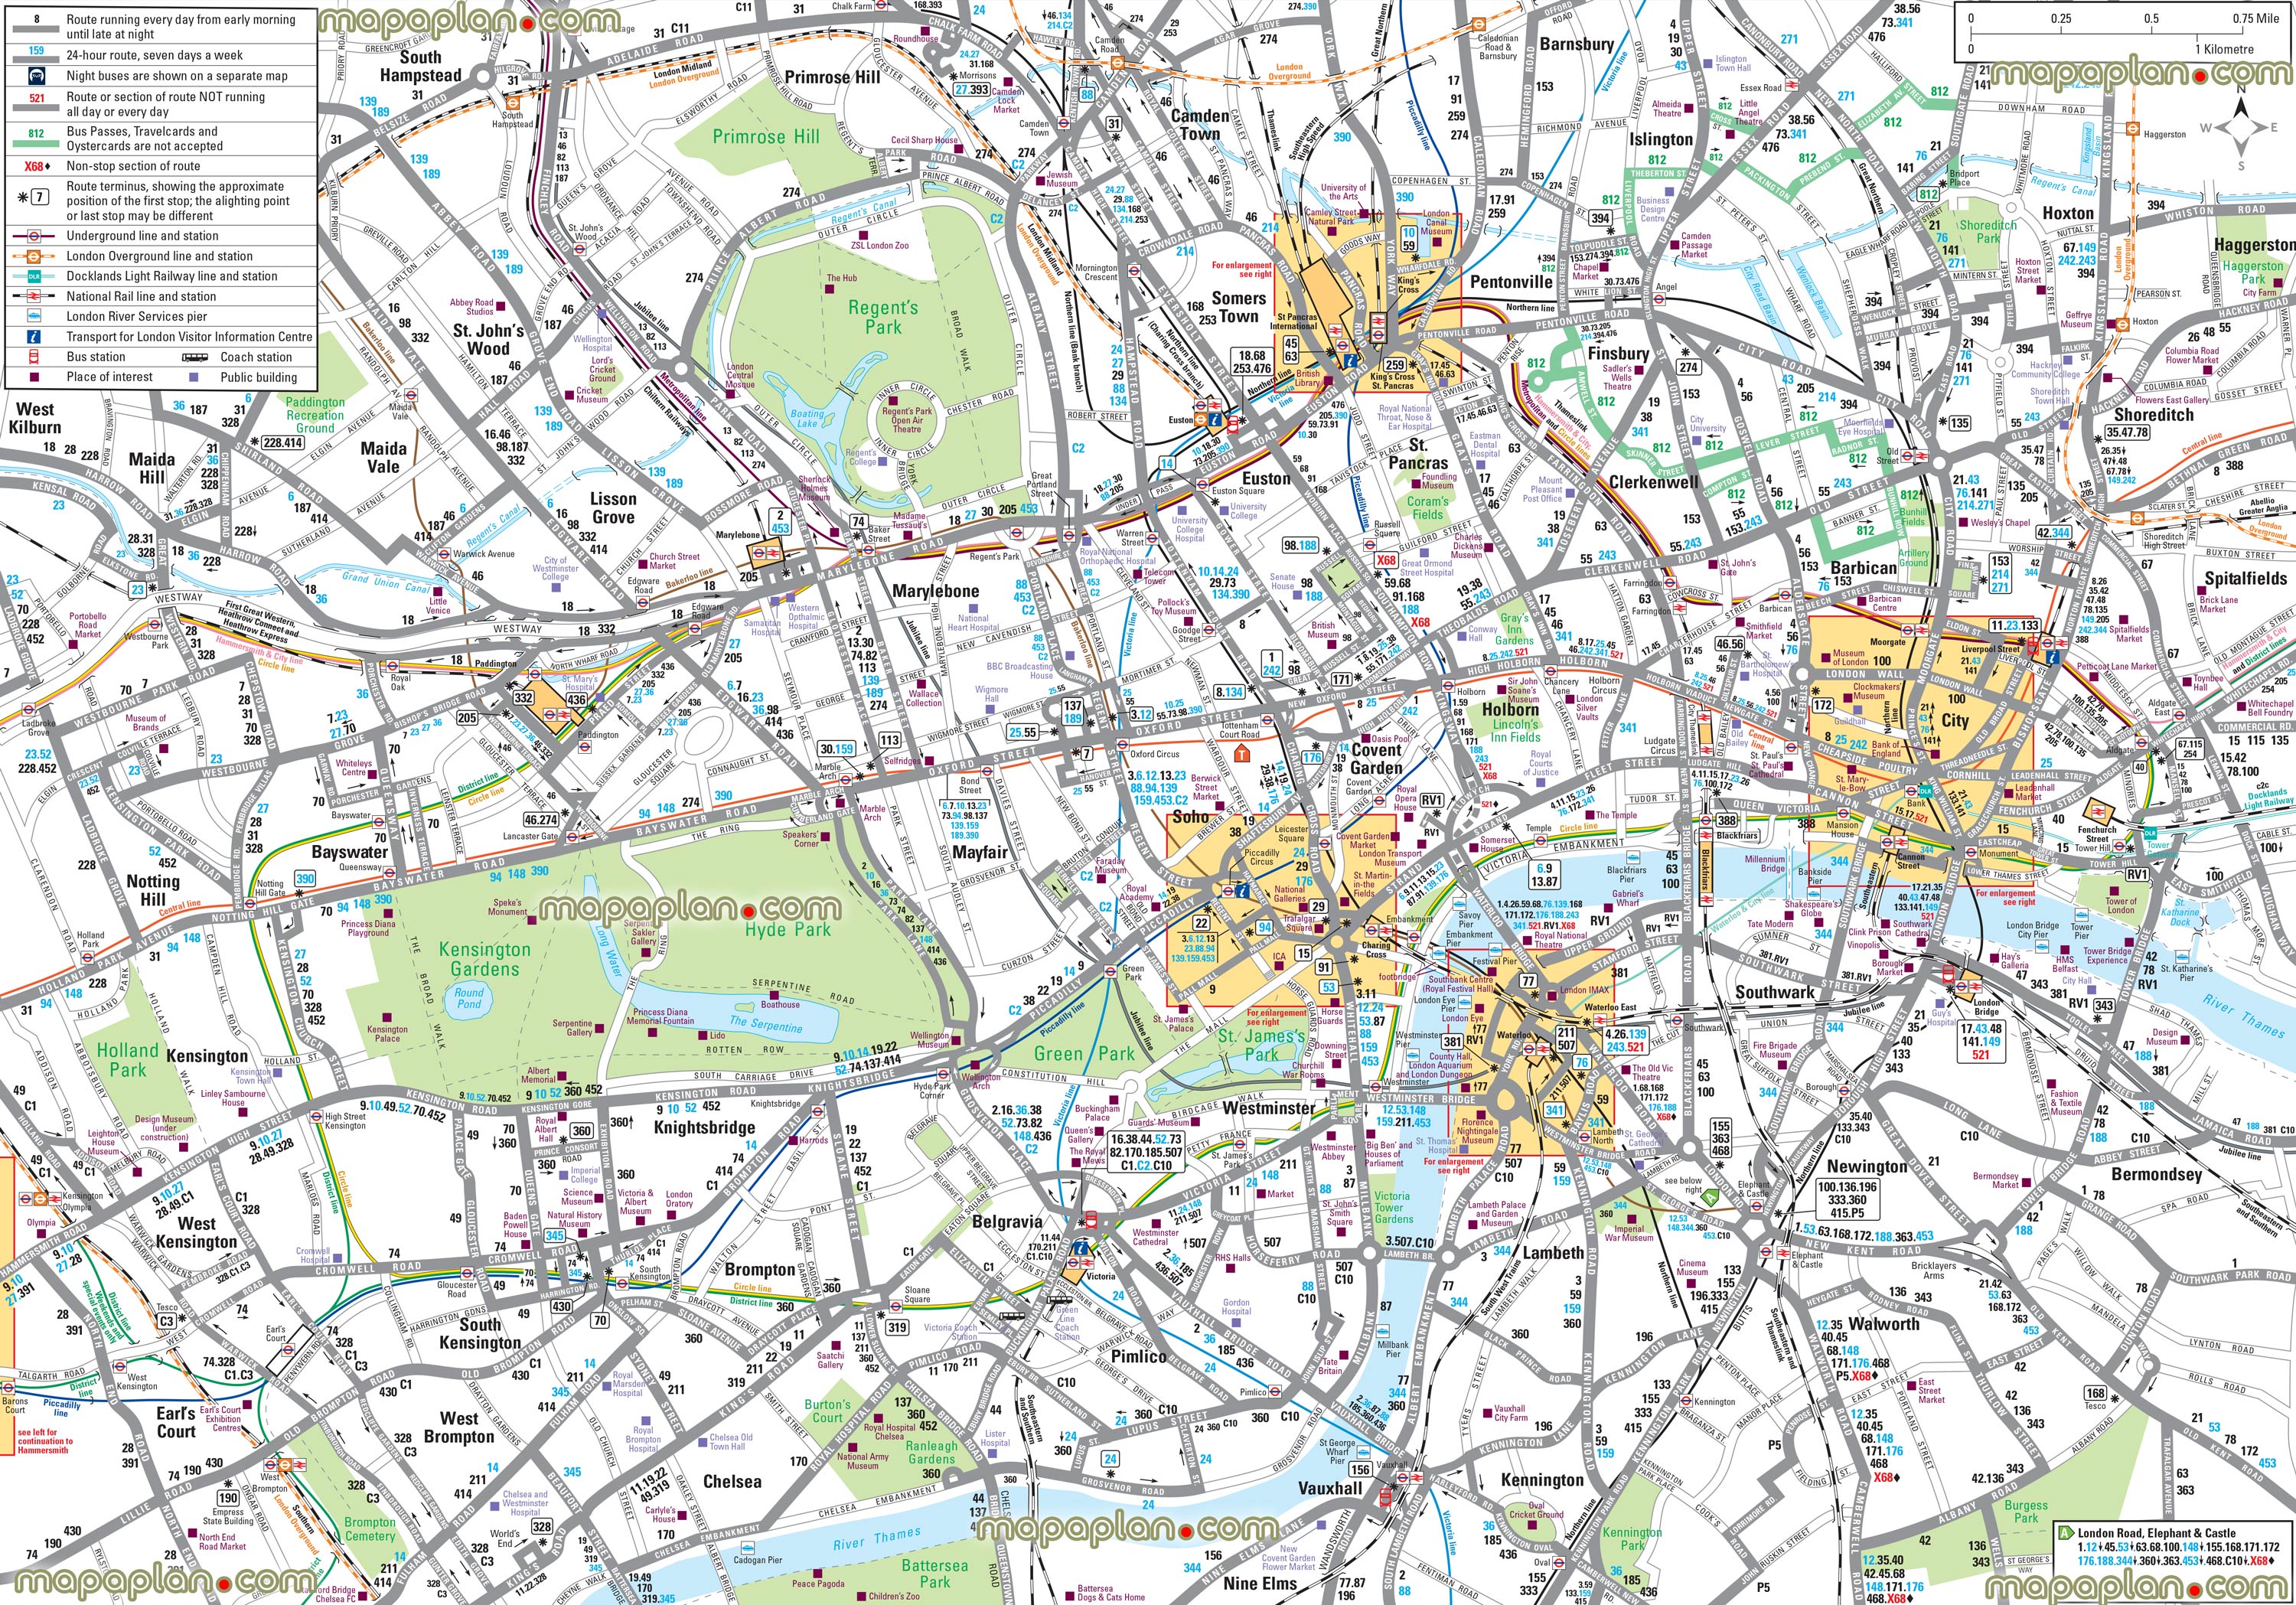 london-map-detailed-map-of-central-london-england-bus-tube-public